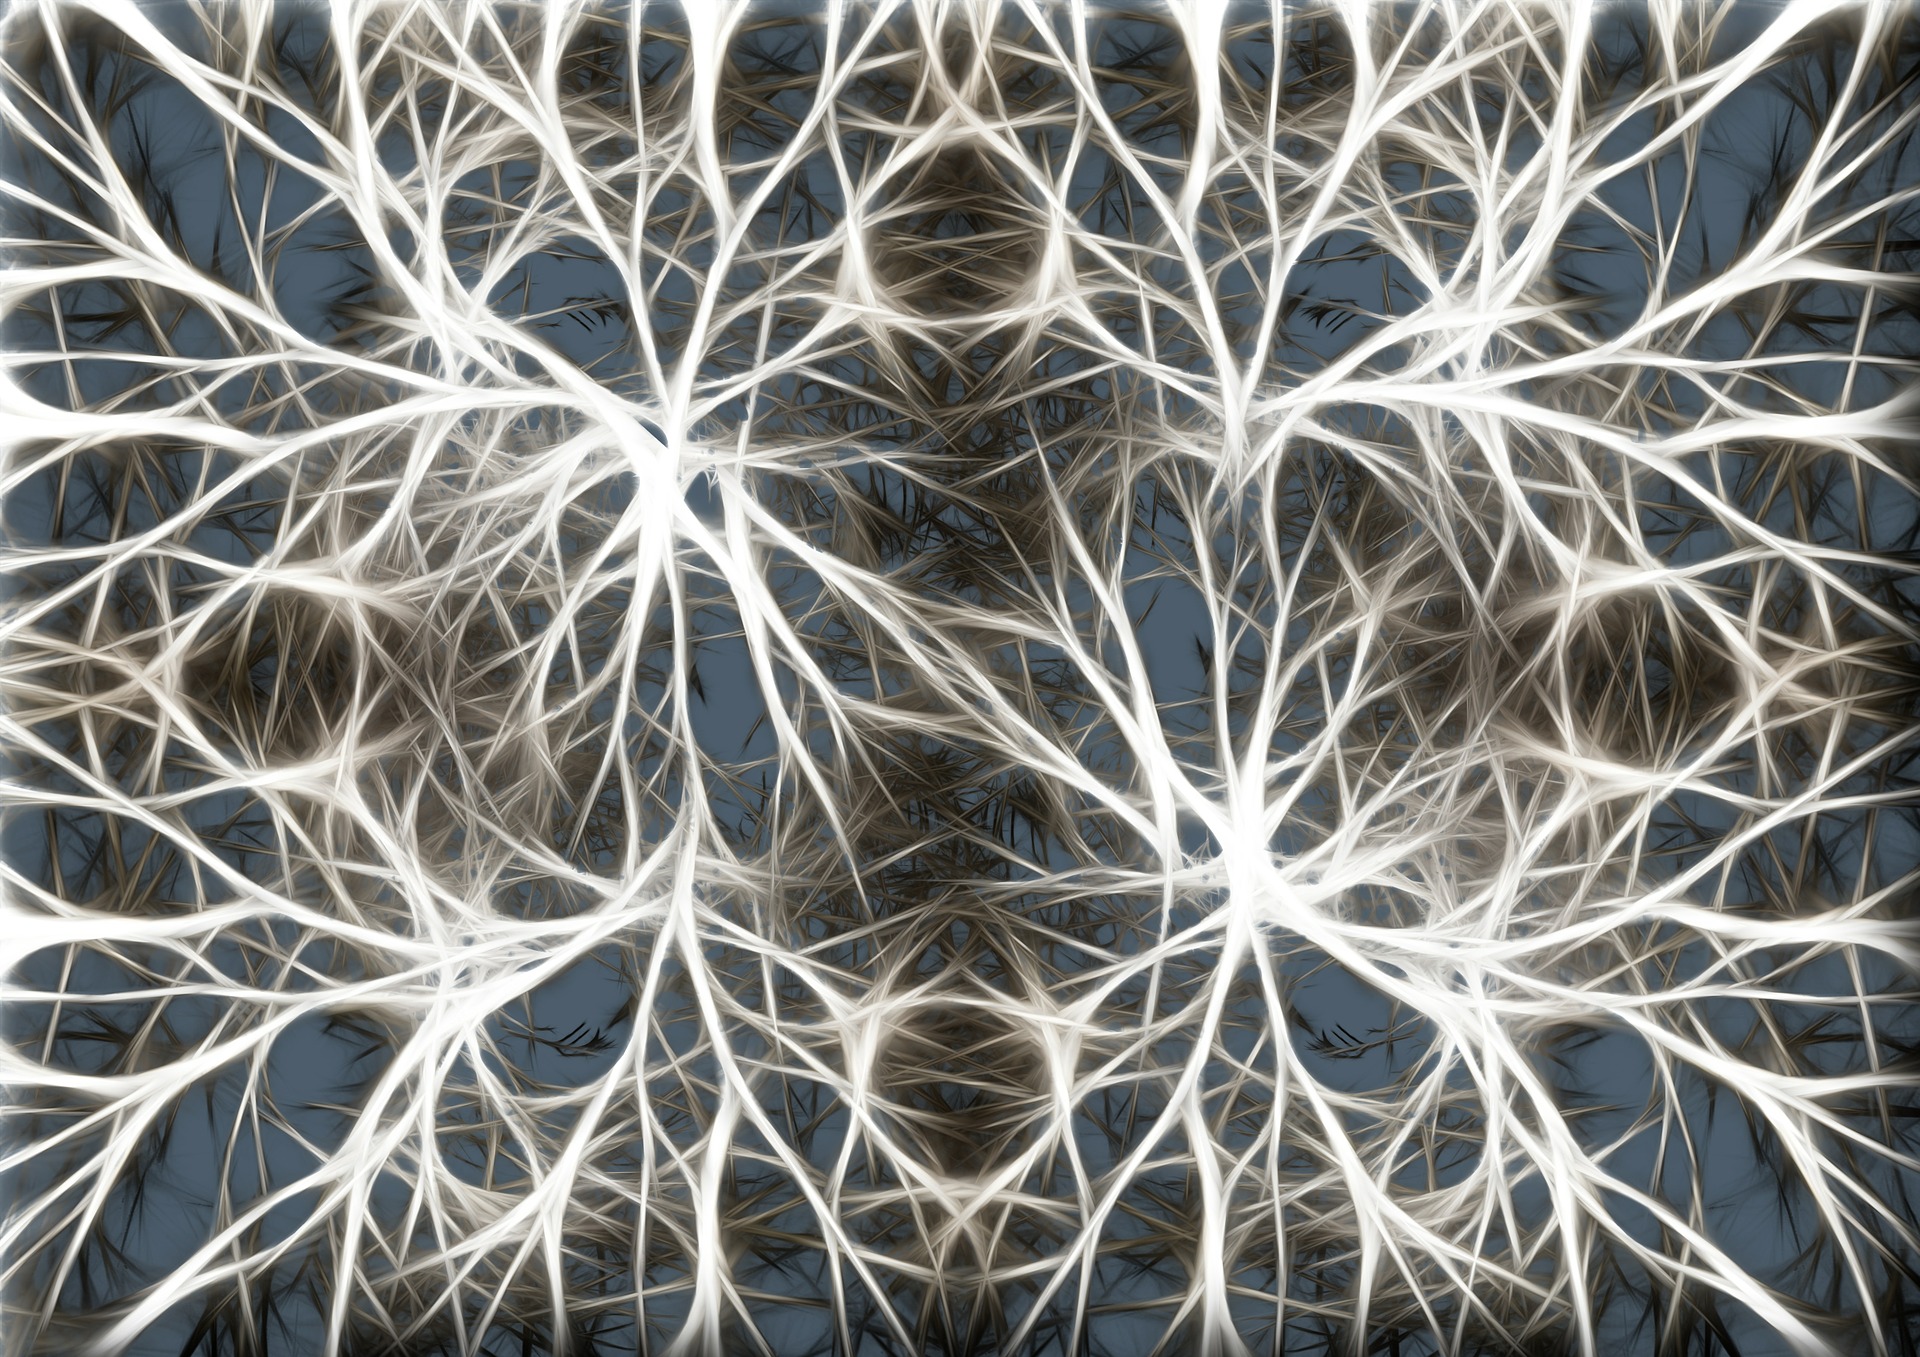 Neurons and synapsis